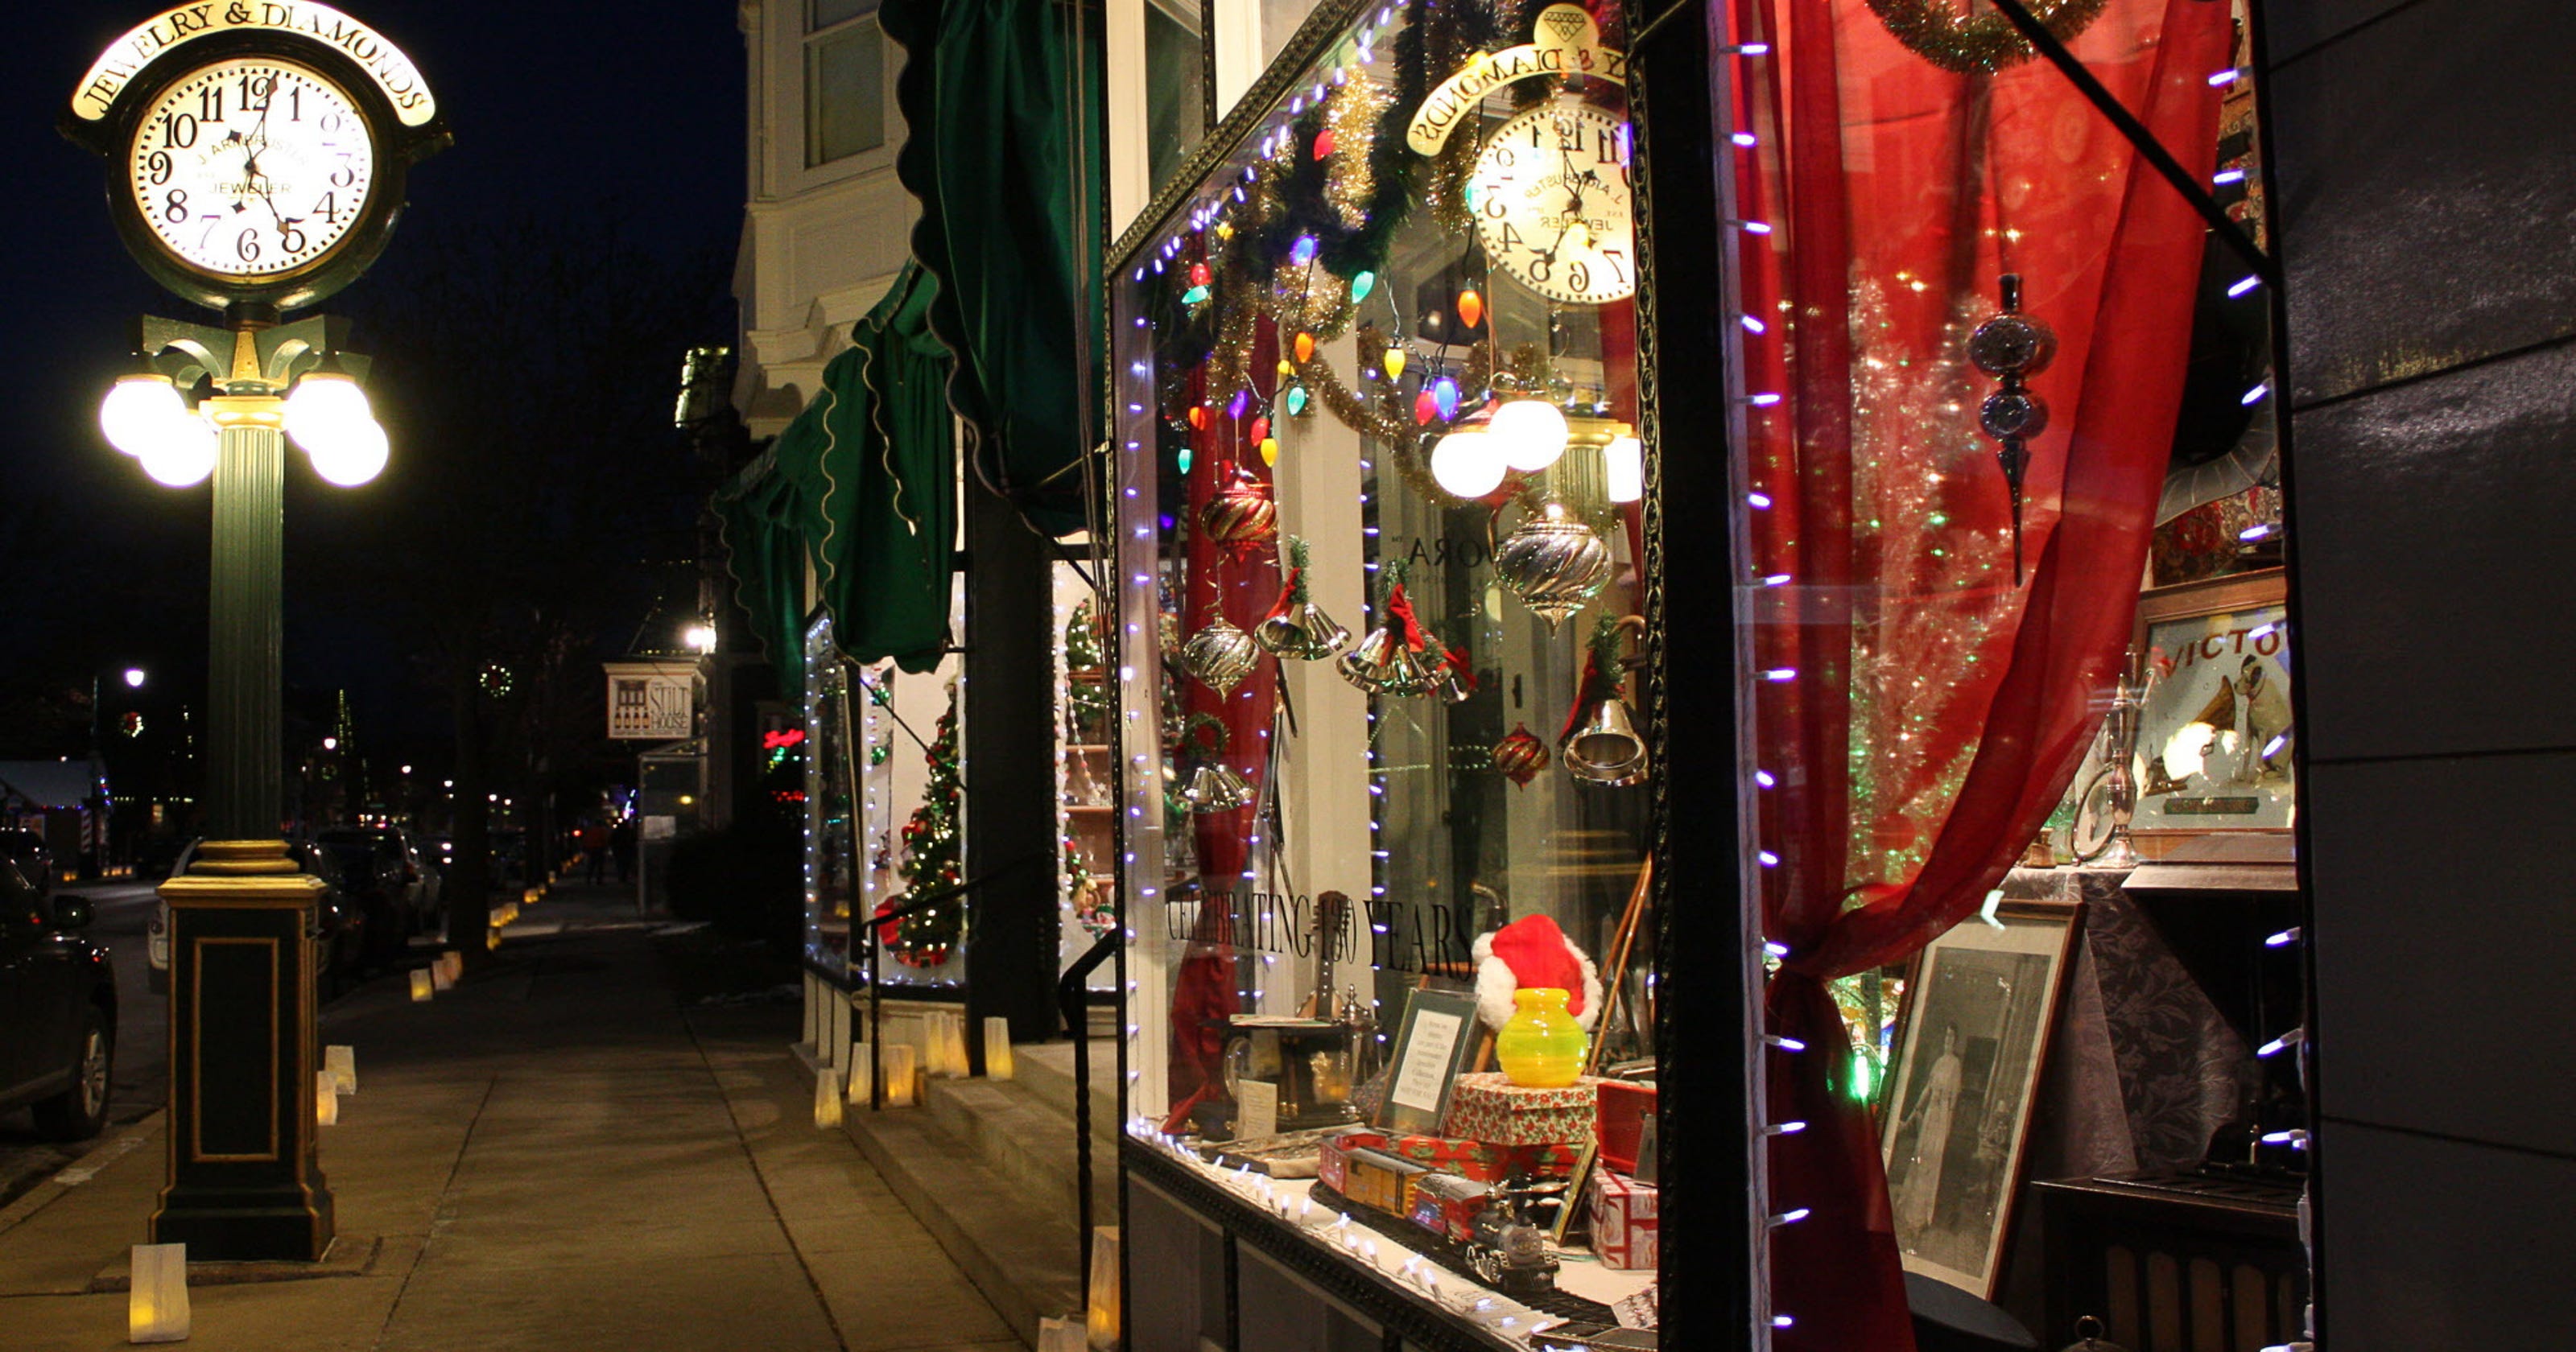 5 Hallmark-worthy Wisconsin small towns to visit during the holidays